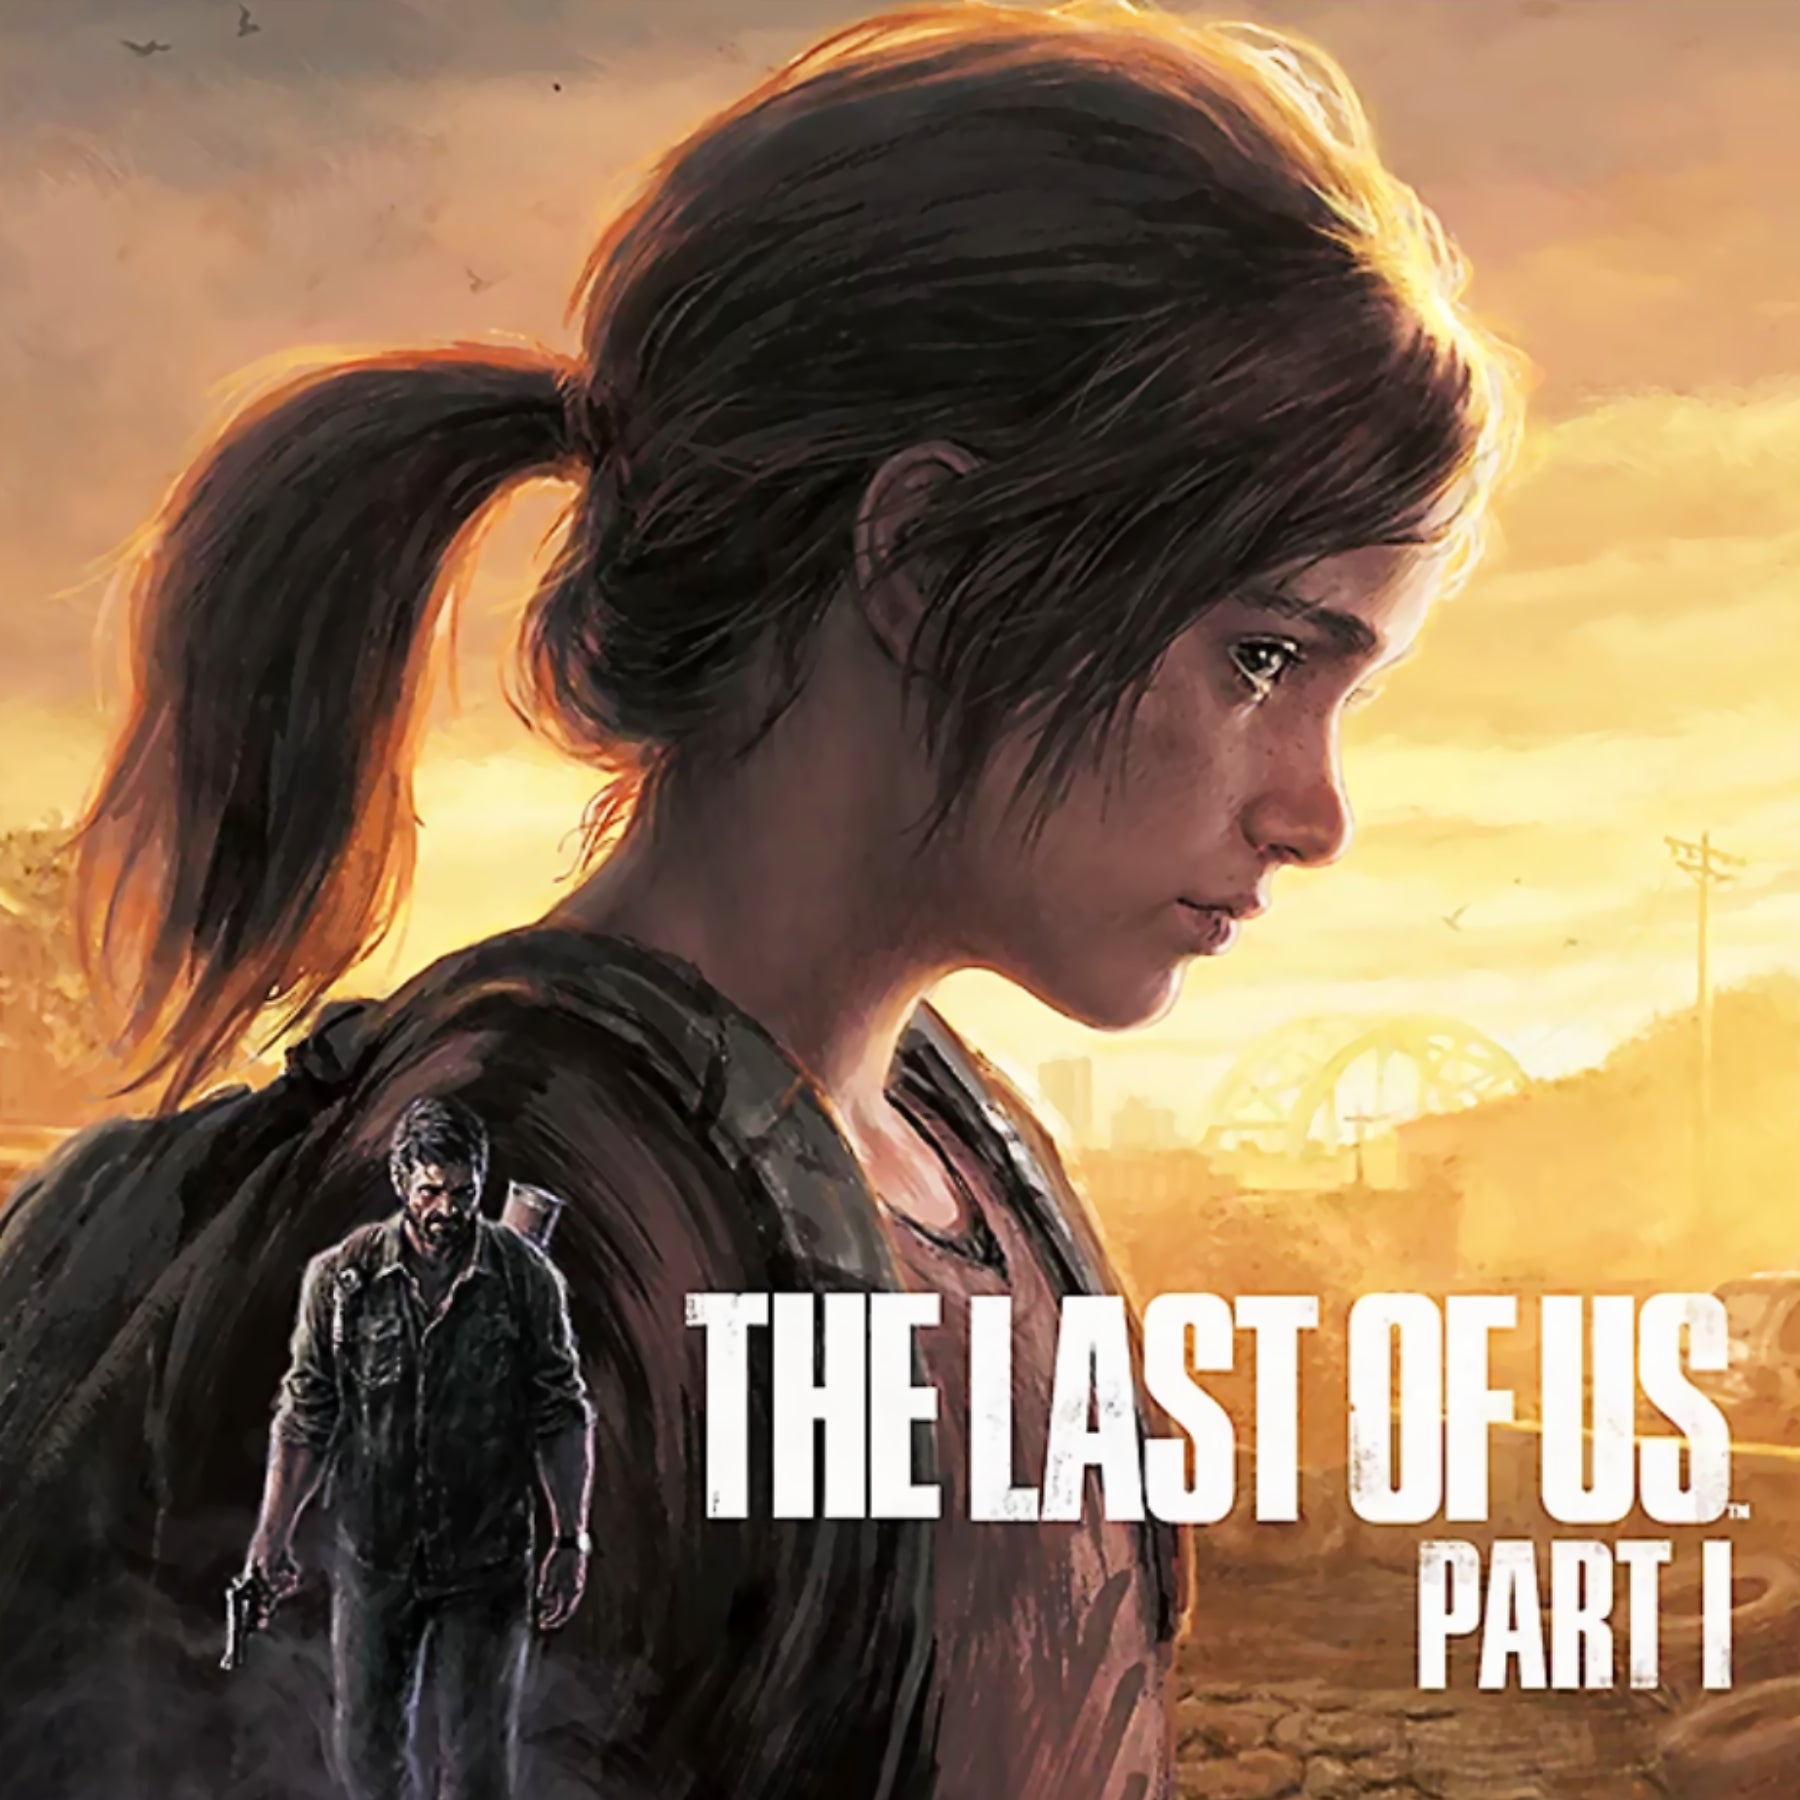 The Last of US Part 1 thrive